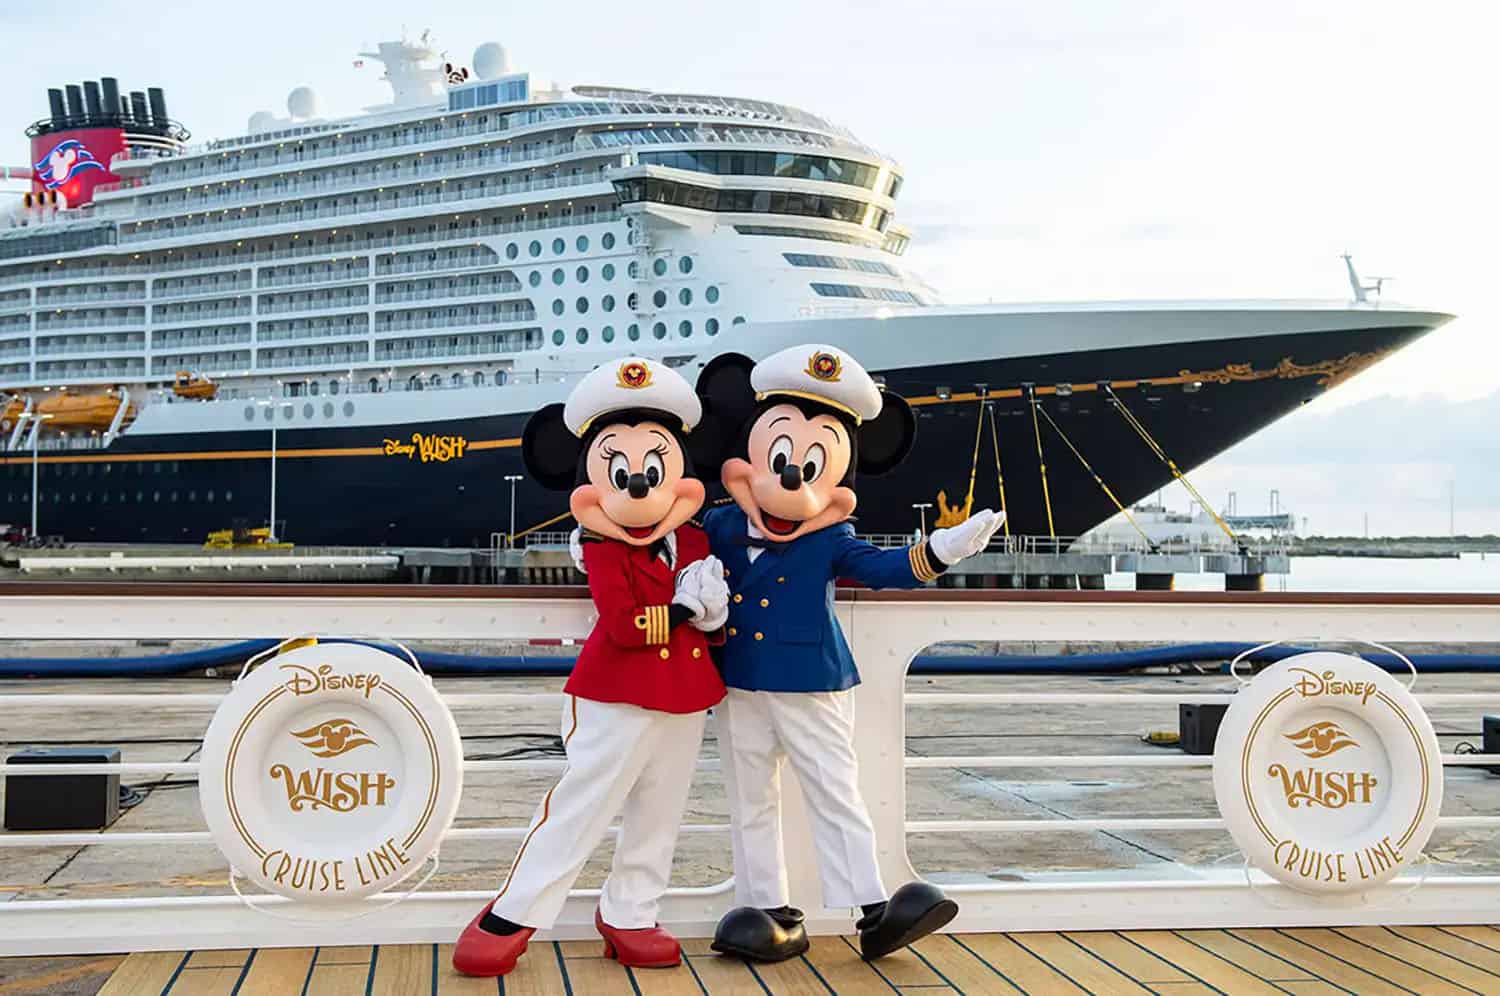 Disney Cruise Line - Mickey and Minnie pose in front of the Disney Wish